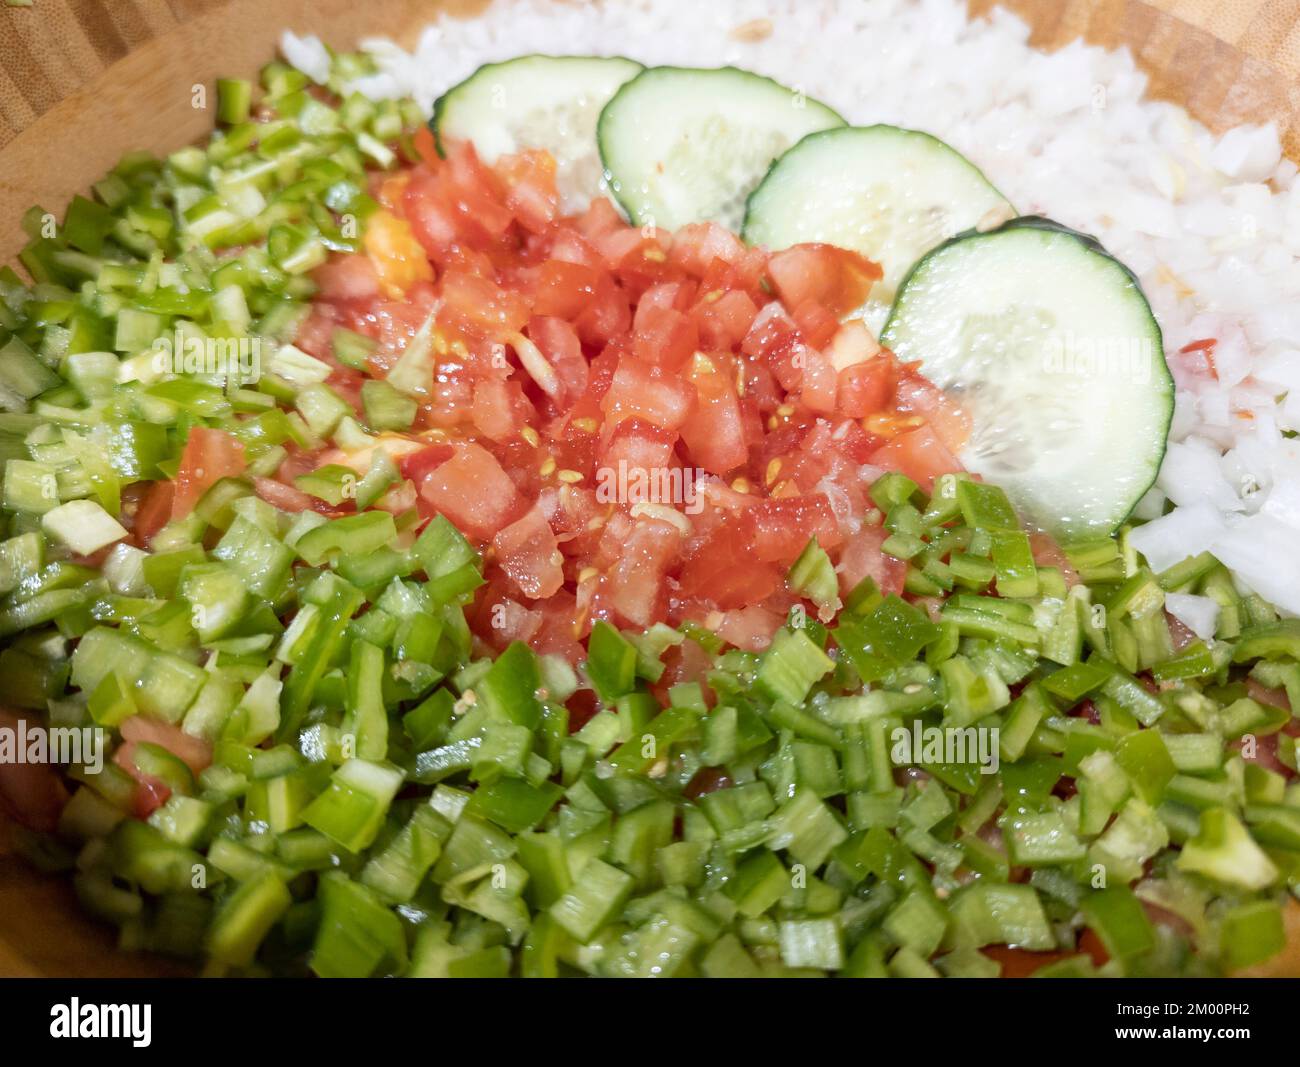 Pipirrana, typical Malaga salad, Malaga Spain, is a salad whose basic ingredients are onion, tomato, green pepper and cucumber Stock Photo